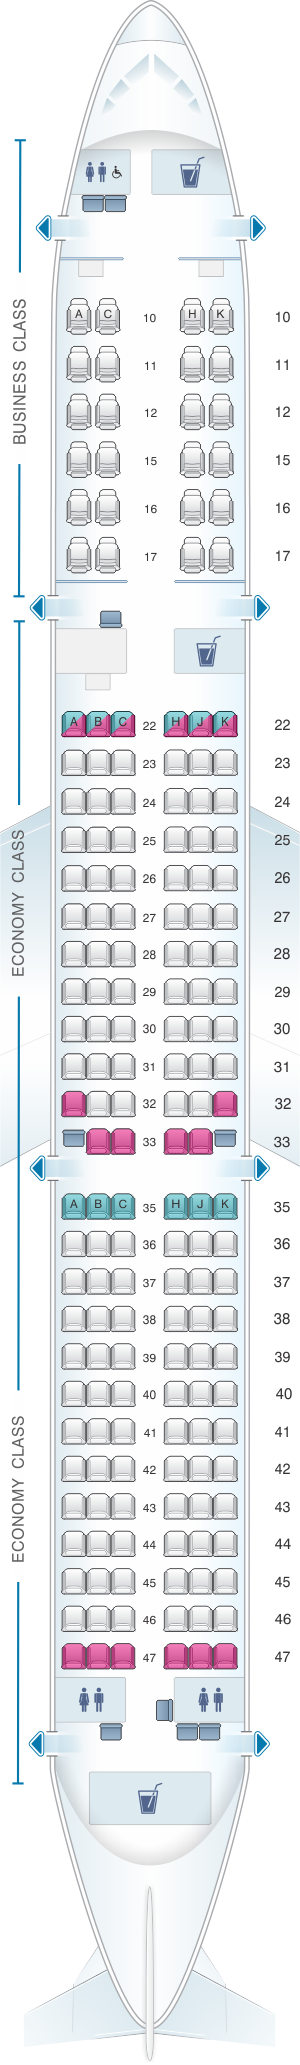 Seat map for Cathay Pacific Airways Cathay Dragon Airbus A321 200